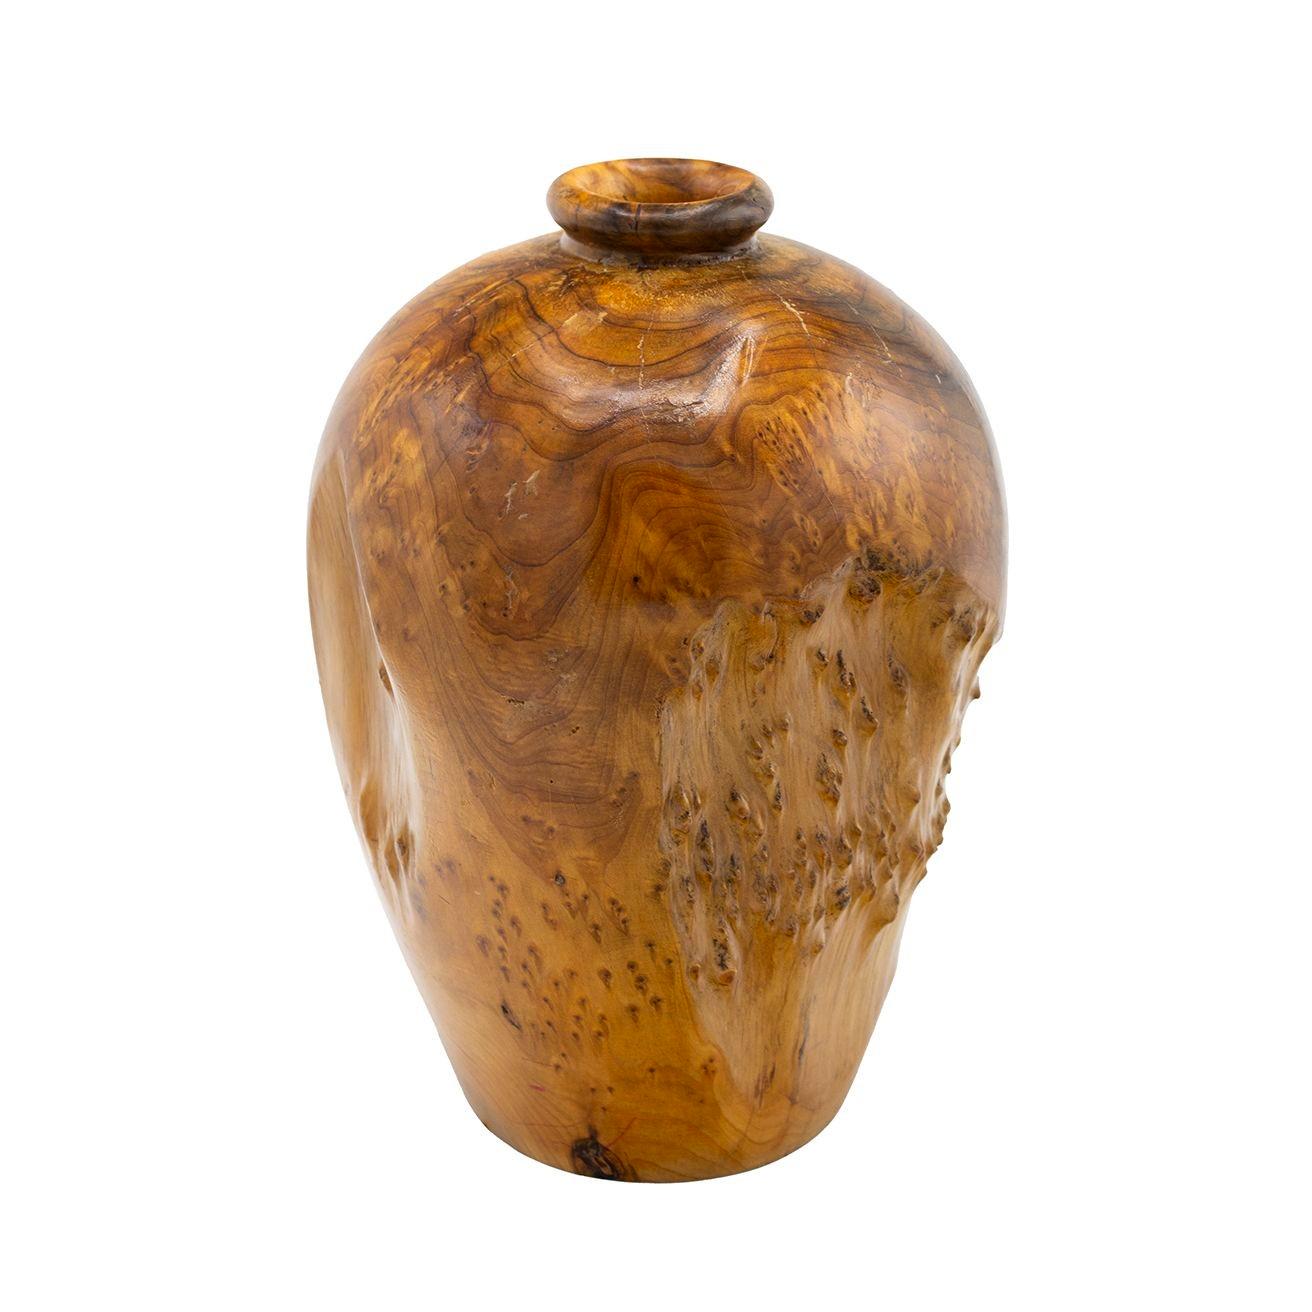 Burl Wood Vessel or Vase in Chinese Fir For Sale 2